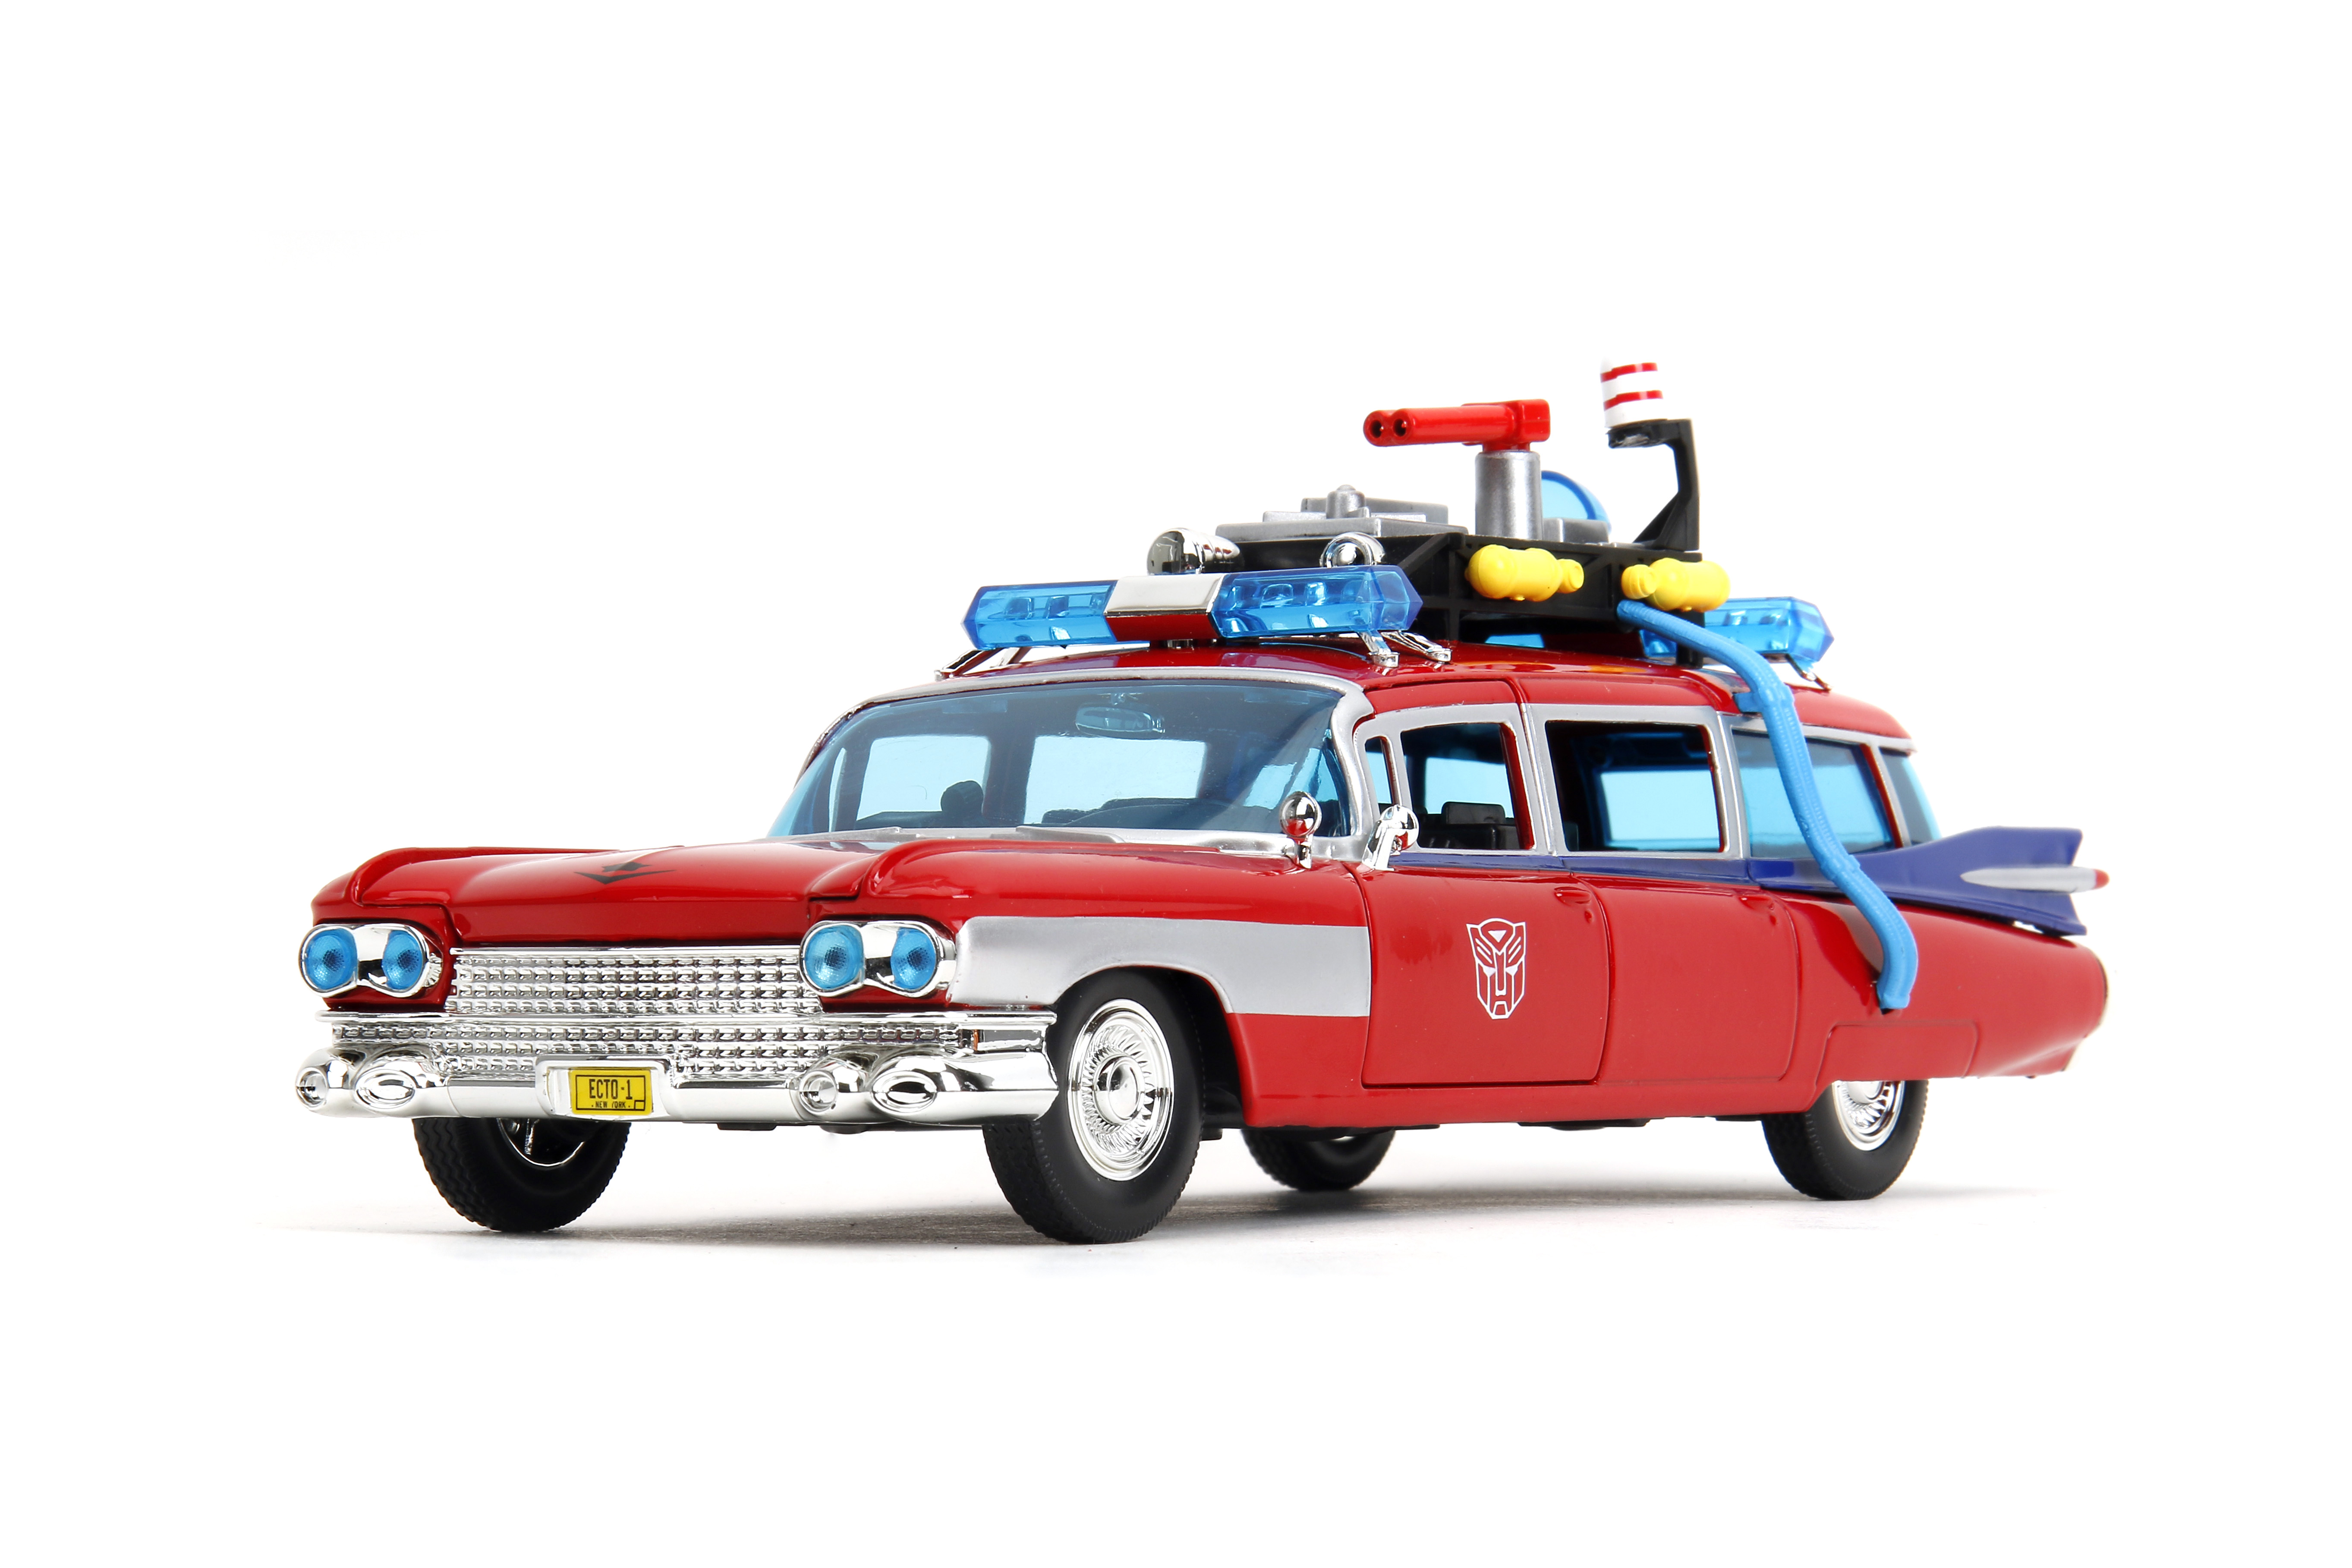 Ghostbusters Ecto-1 die-cast model from Jada Toys receives a rerelease -  Ghostbusters News